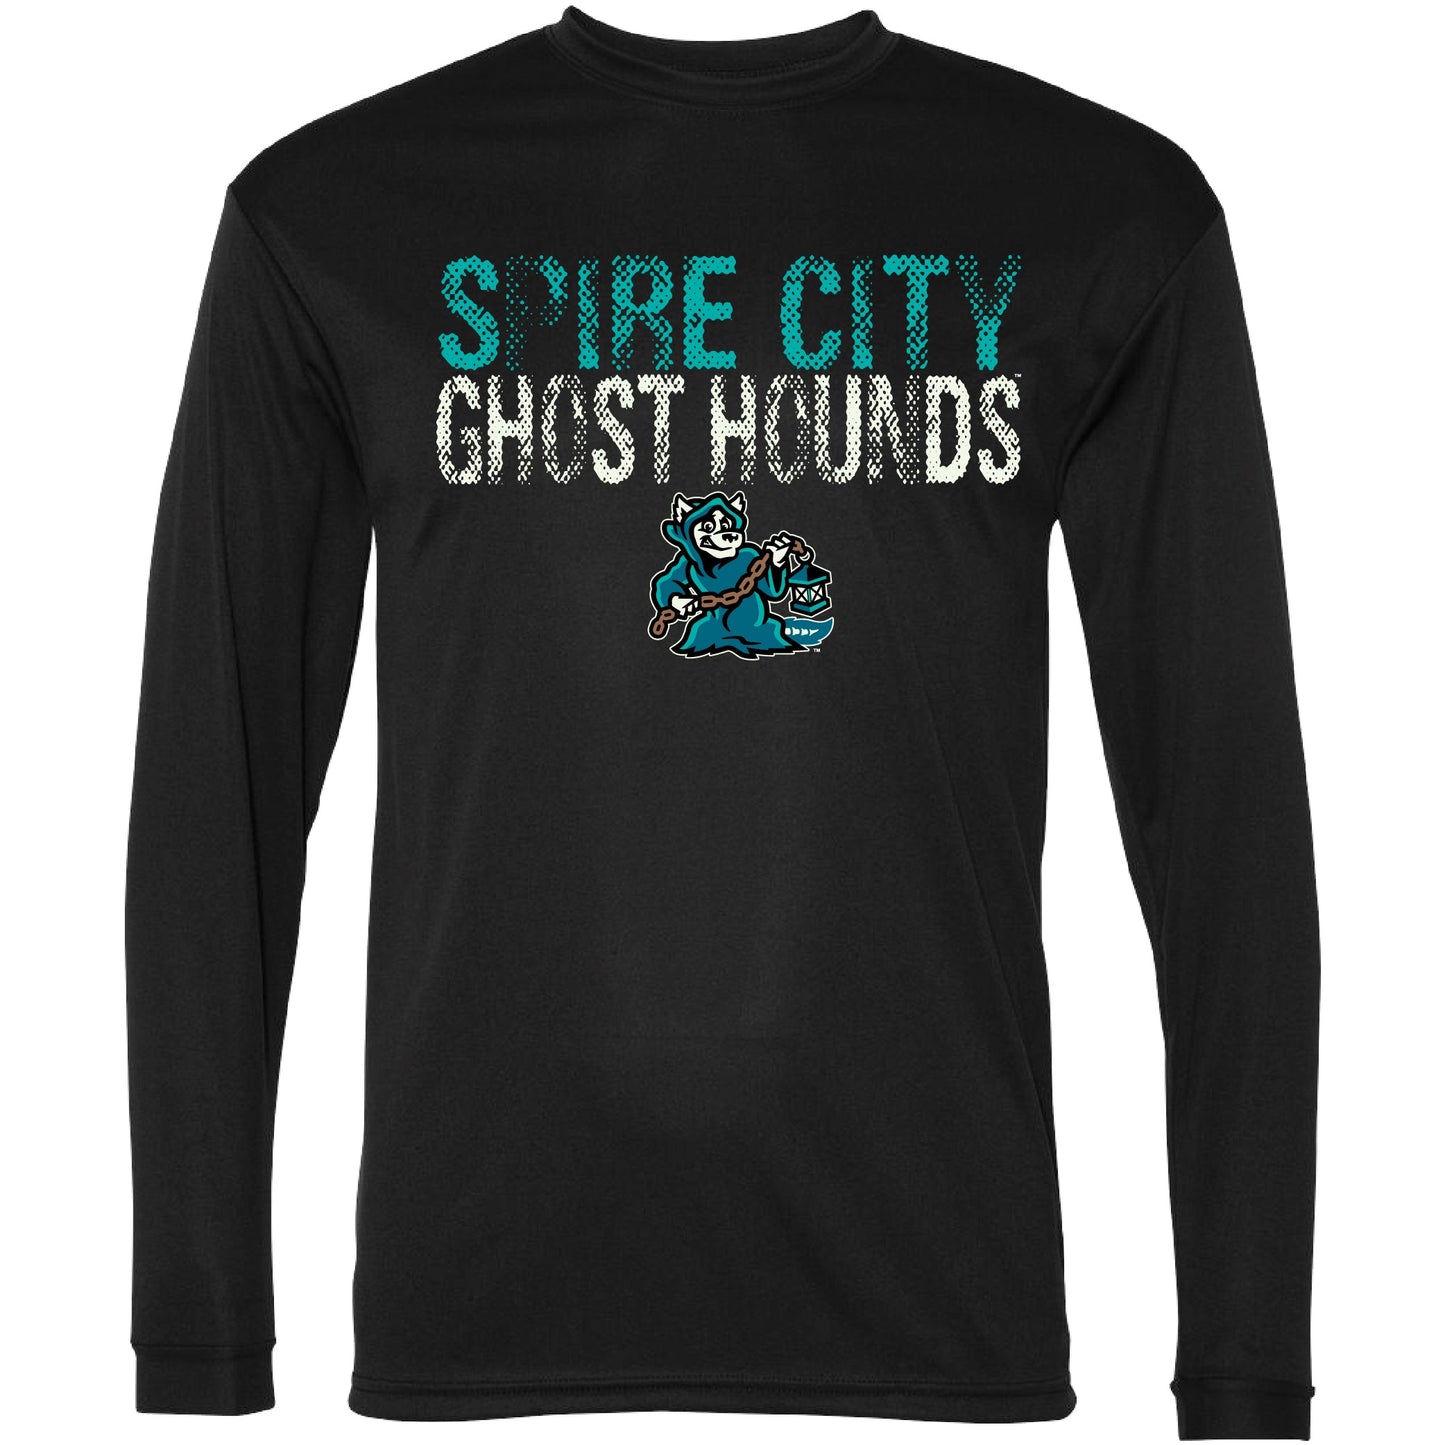 Spire City Ghost Hounds Performance Long Sleeve Shirt